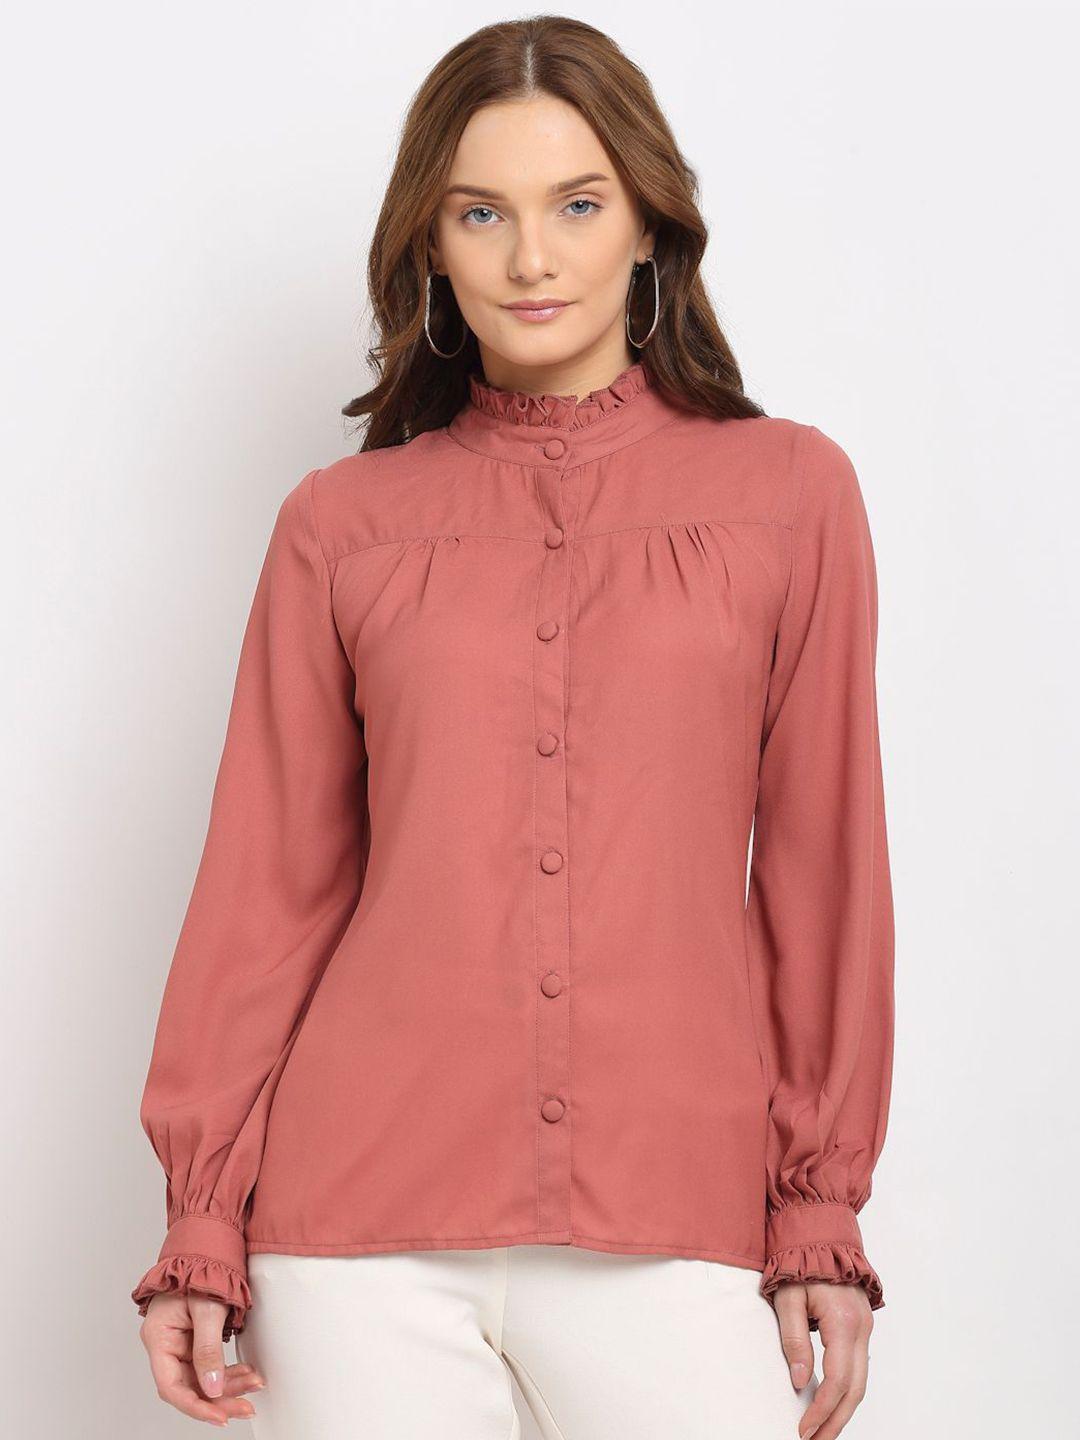 La Zoire  Women Pink Frilled Band Collar Top